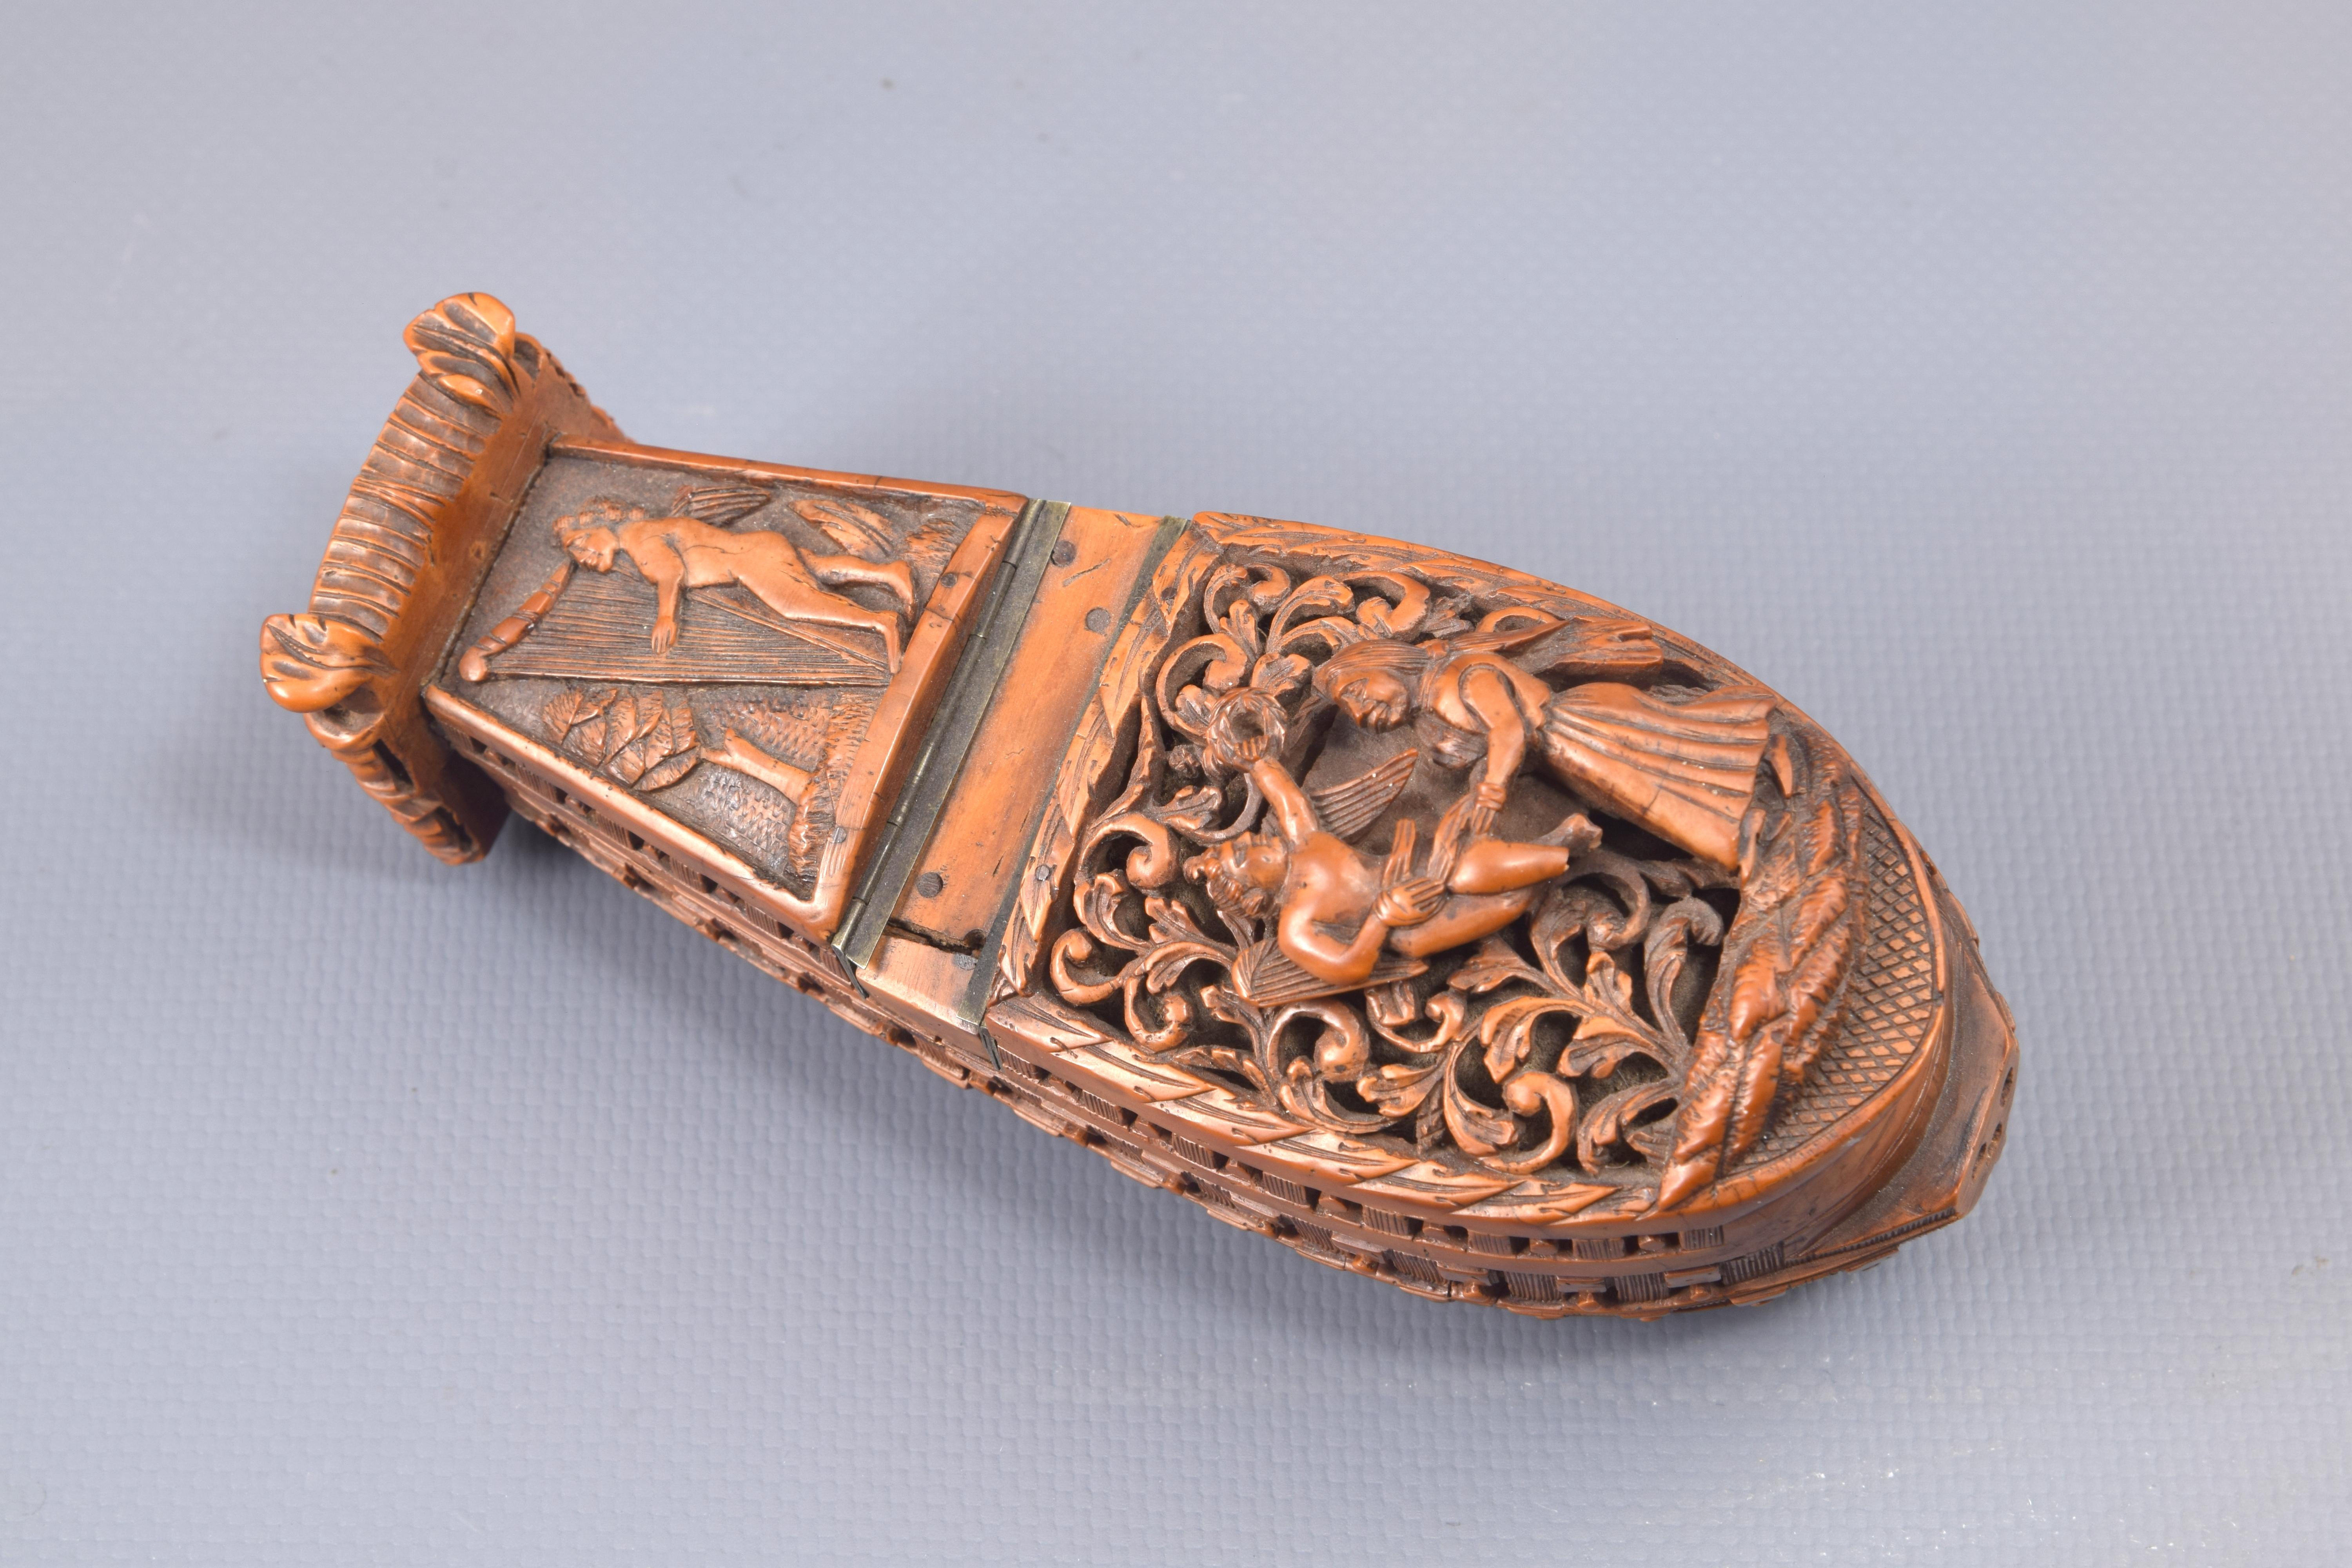 Snuffbox. Boxwood, Century XVIII.
 Box or snuff box made of carved boxwood and metal worked to have the shape of a ship, with the lower part decorated with garlands and the front with three rows of cannons; note the work present in what would be